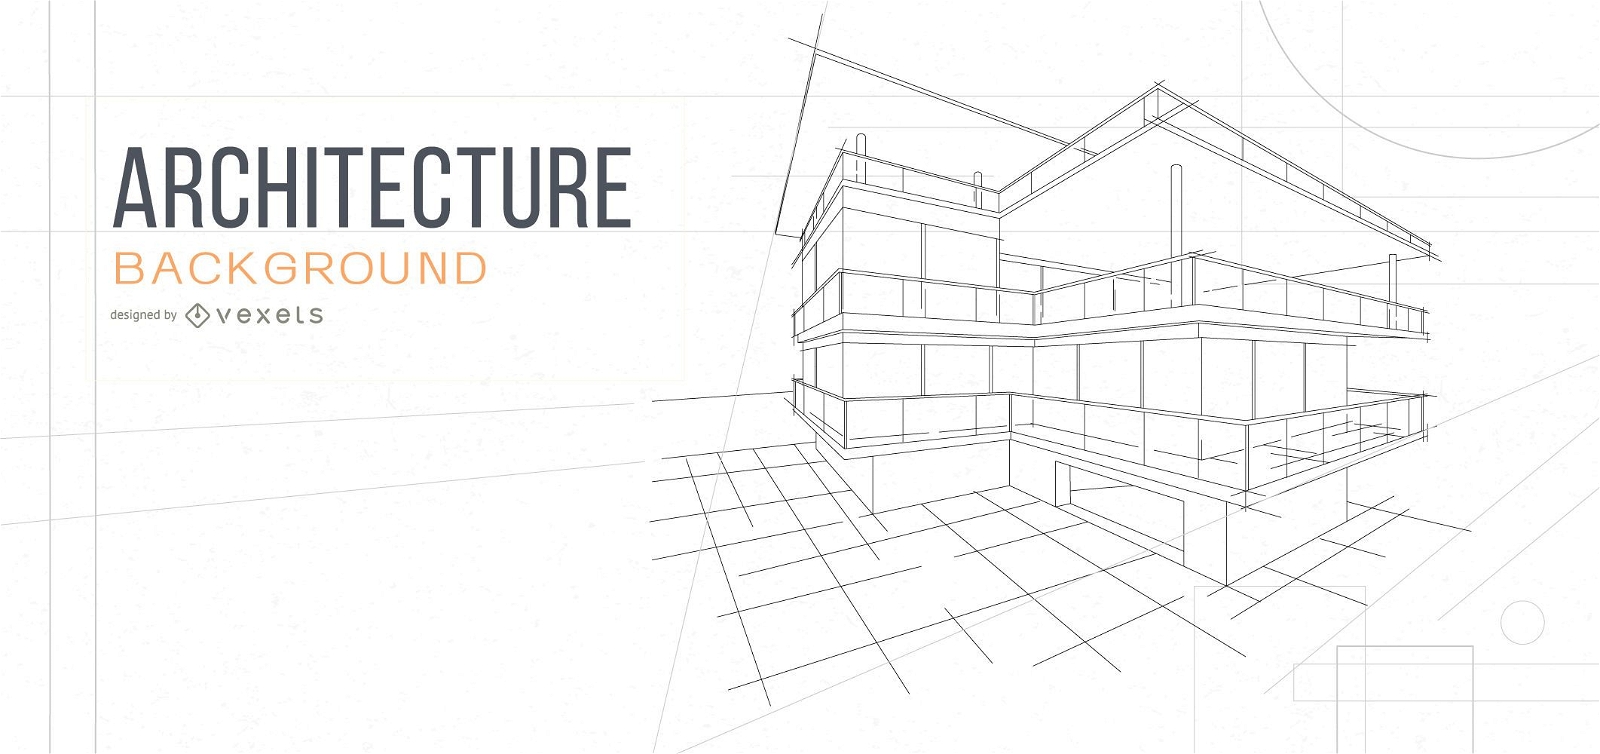 Why do Architects Sketch with Wavy Lines? - YouTube